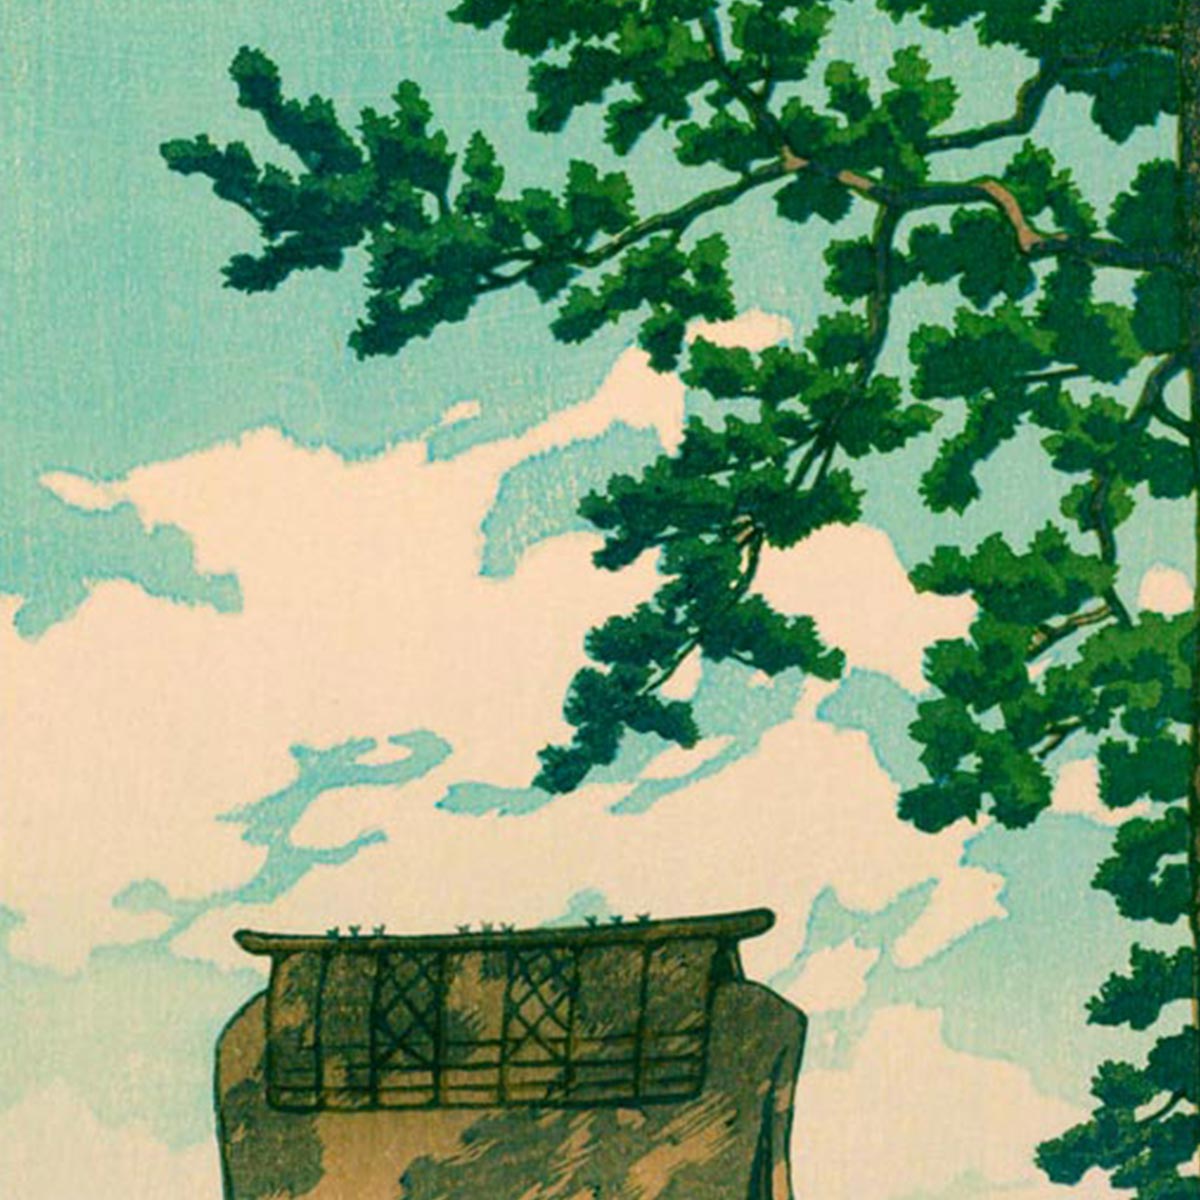 Shogetsuin Temple, Ito Art Print by Hasui